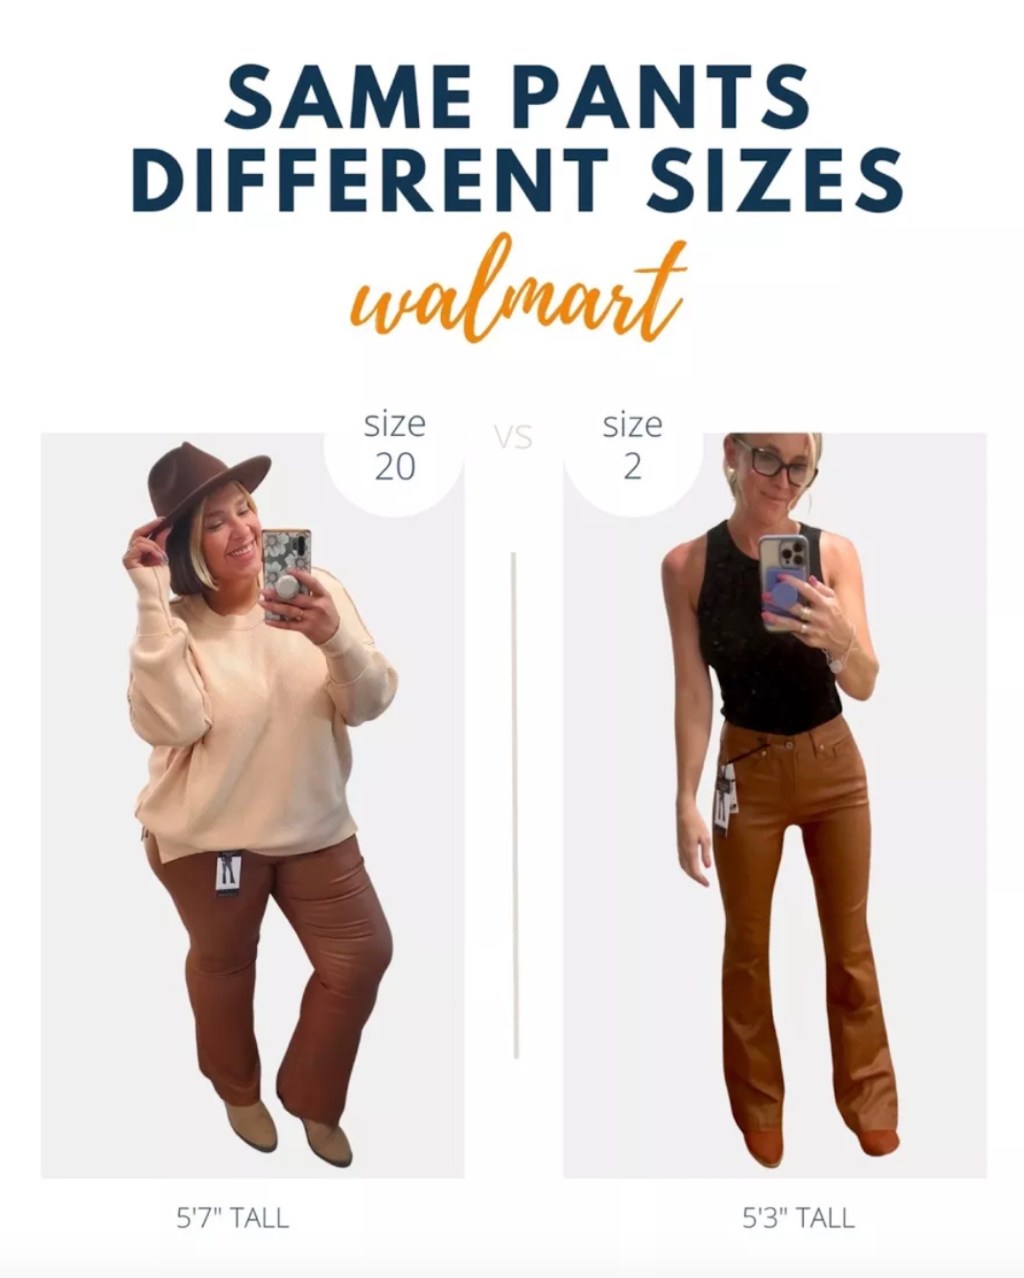 graphic of two women modeling the same brown pants with sizes and heights